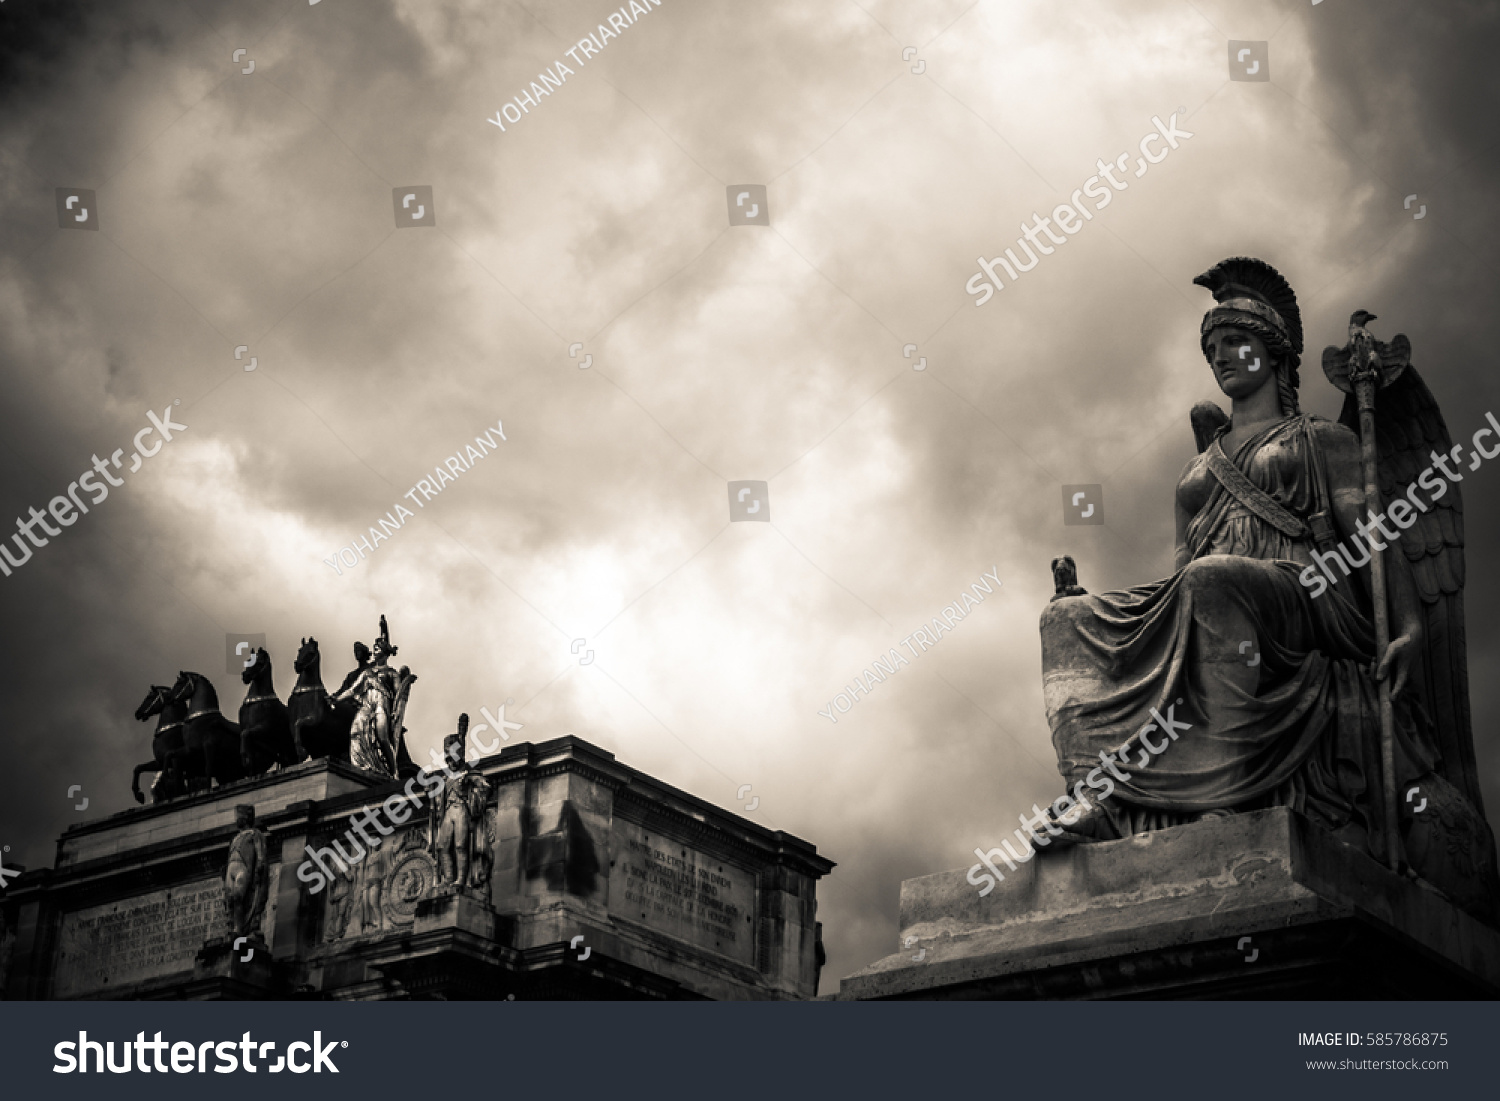 Statues of Greek mythology with cloudy sky background in sepia #585786875